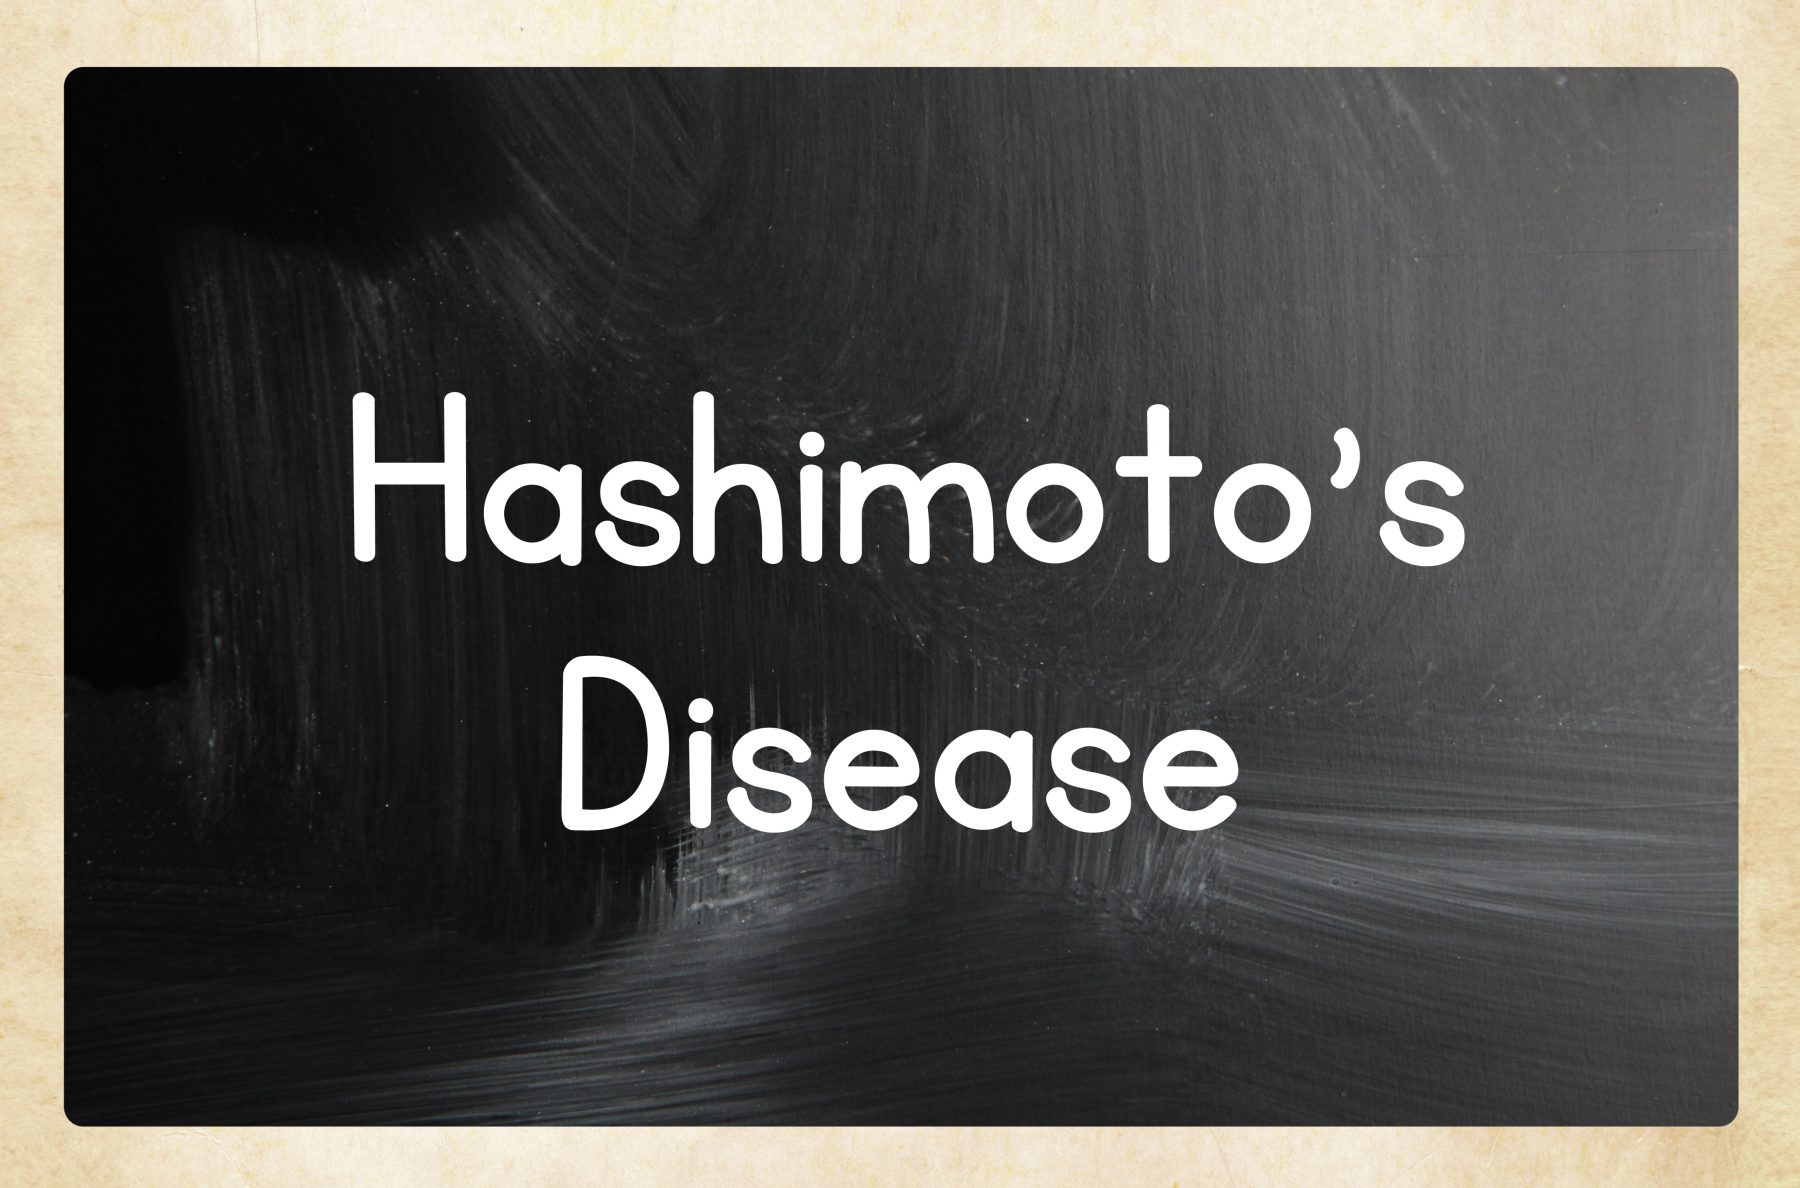 EP 20: Hashimoto’s and the Root Cause of Hypothyroidism